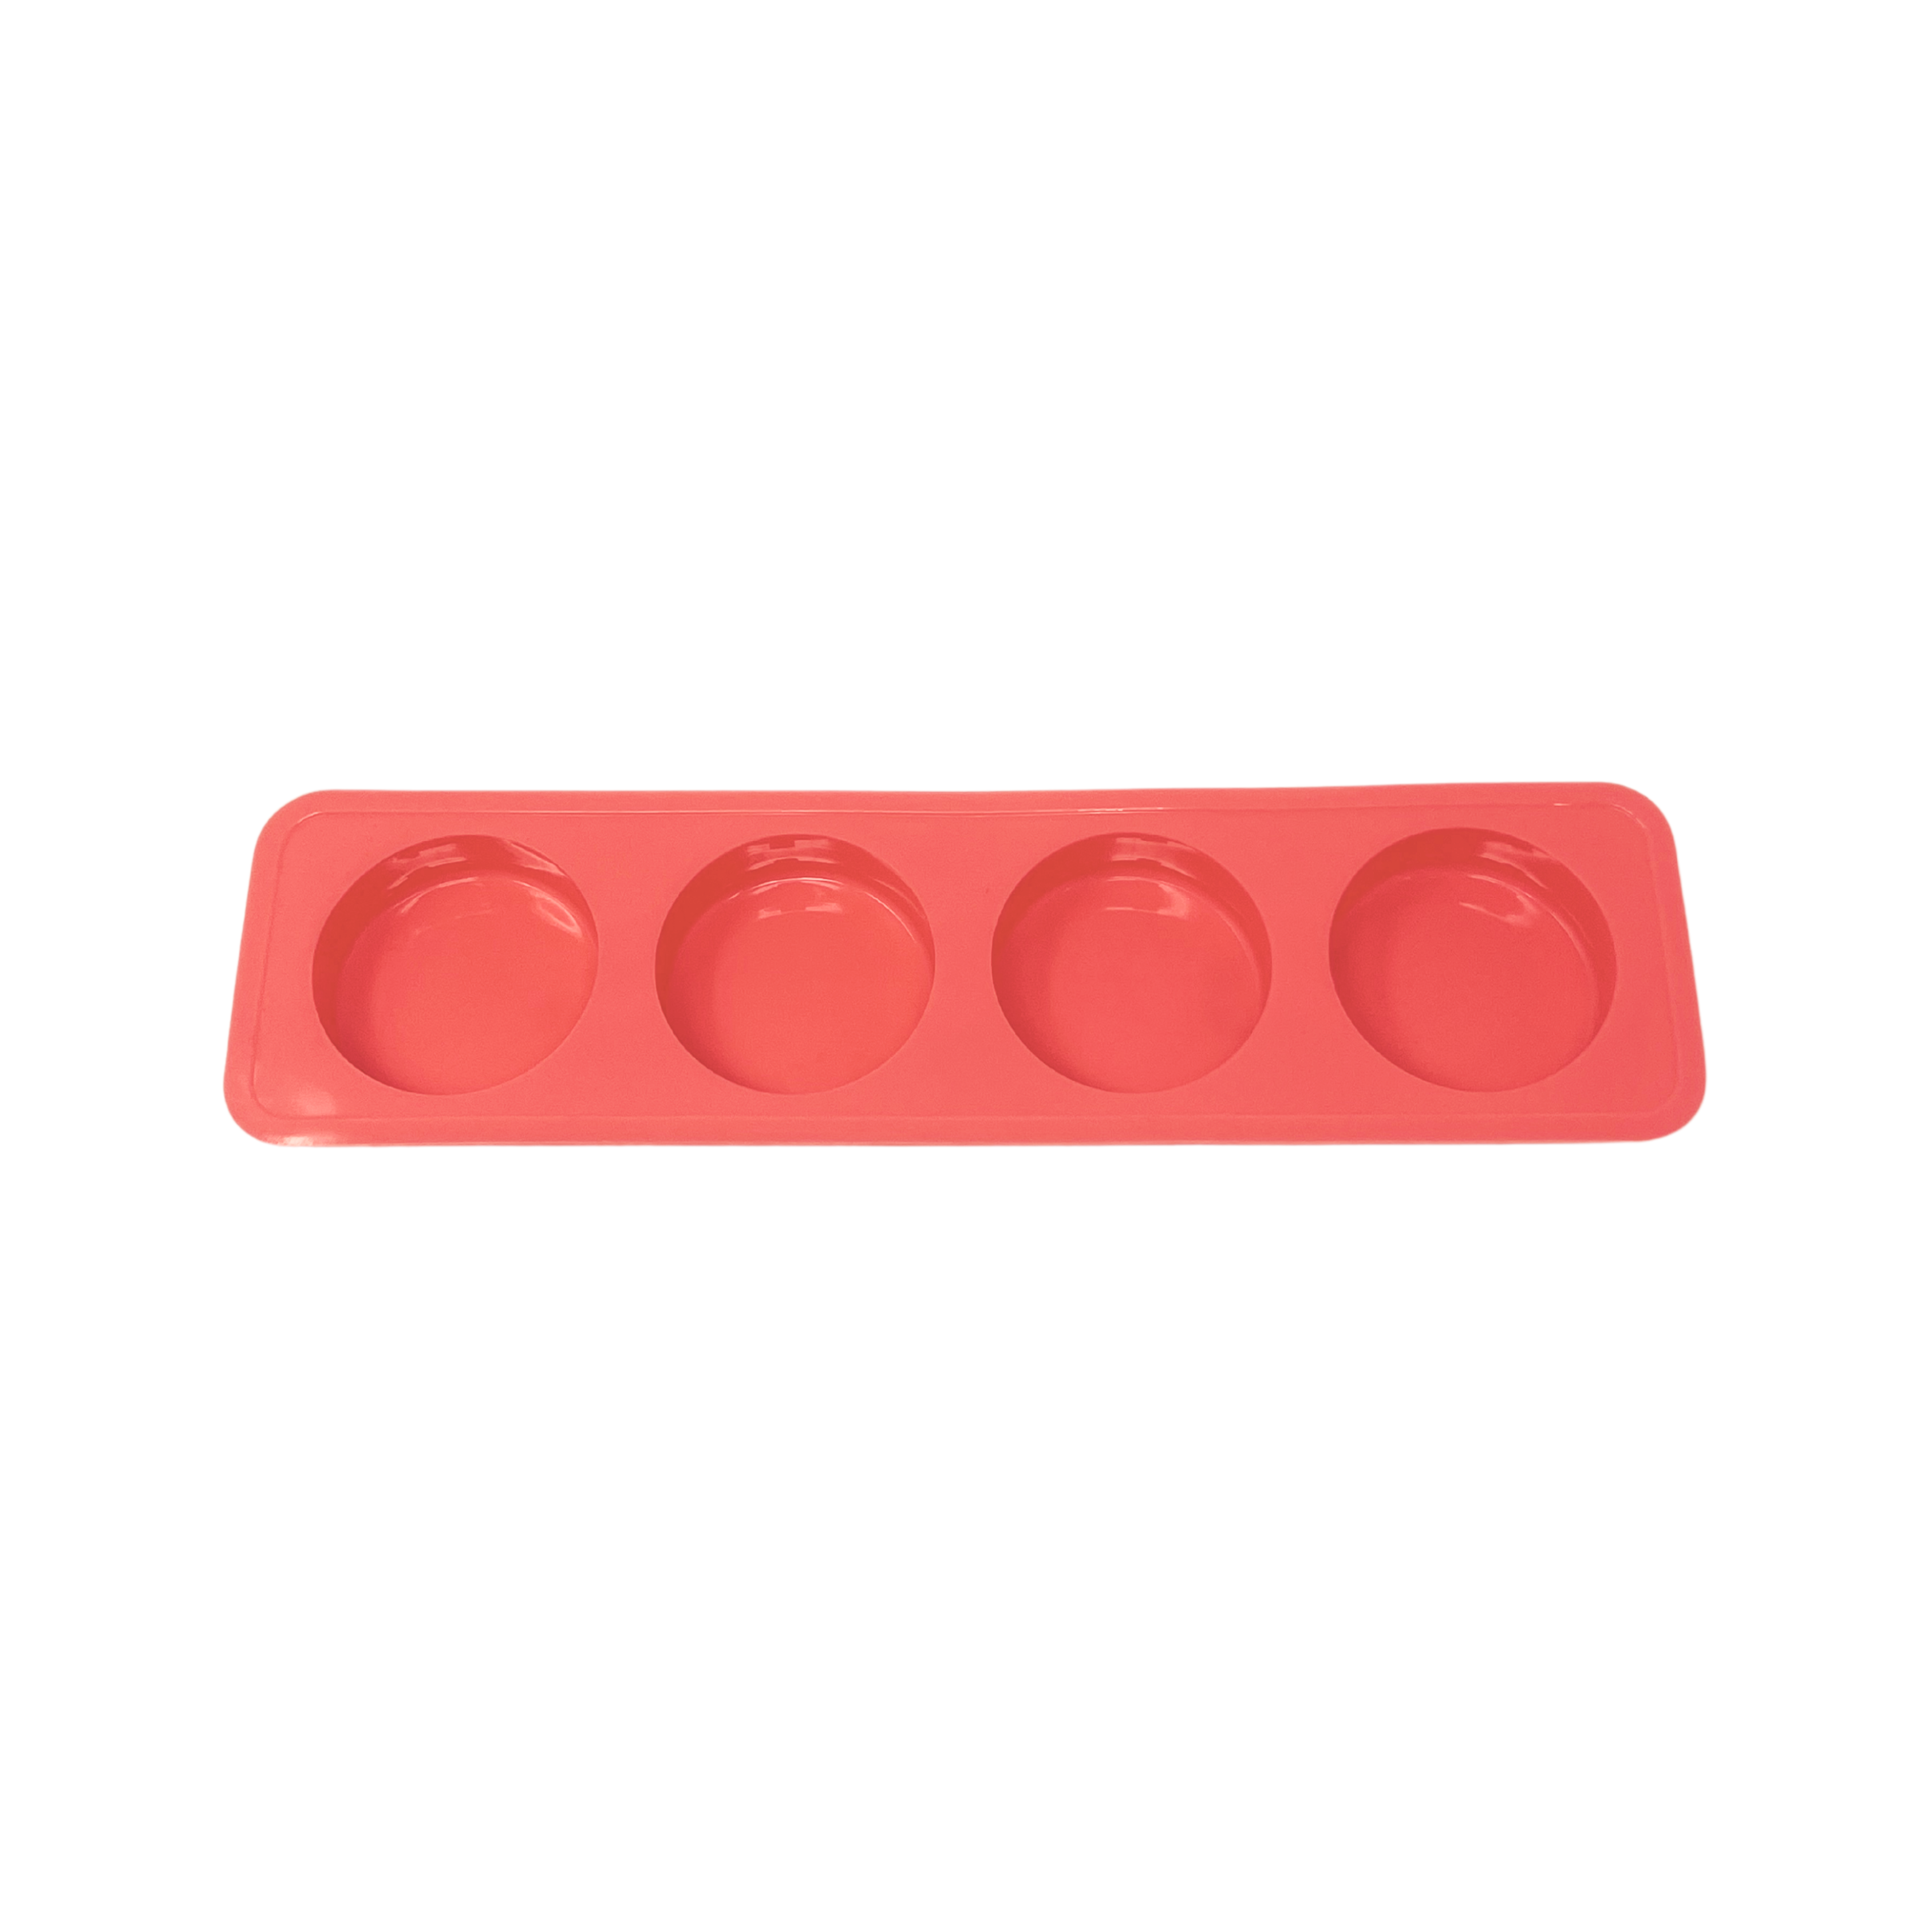 60ml Round Soap Mould - The Mould Story